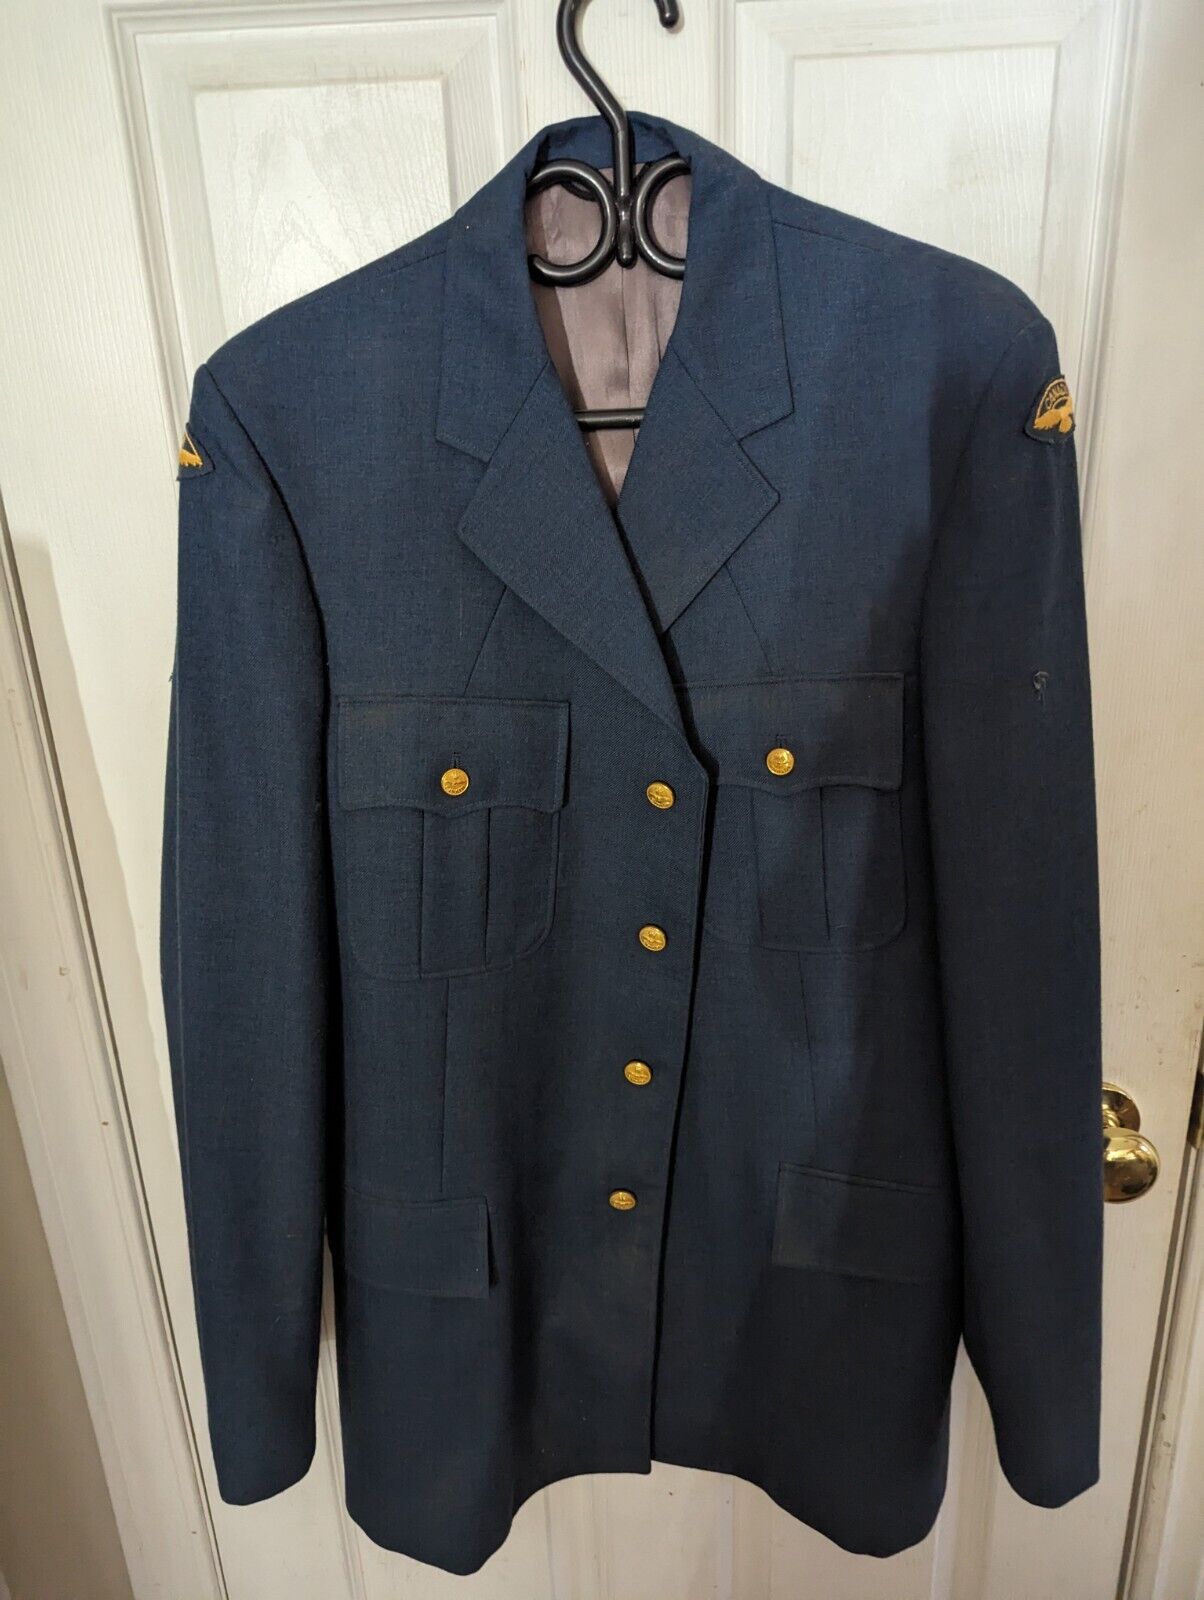 1990 Canadian Canada Air Force Dress Jacket Tunic Blue